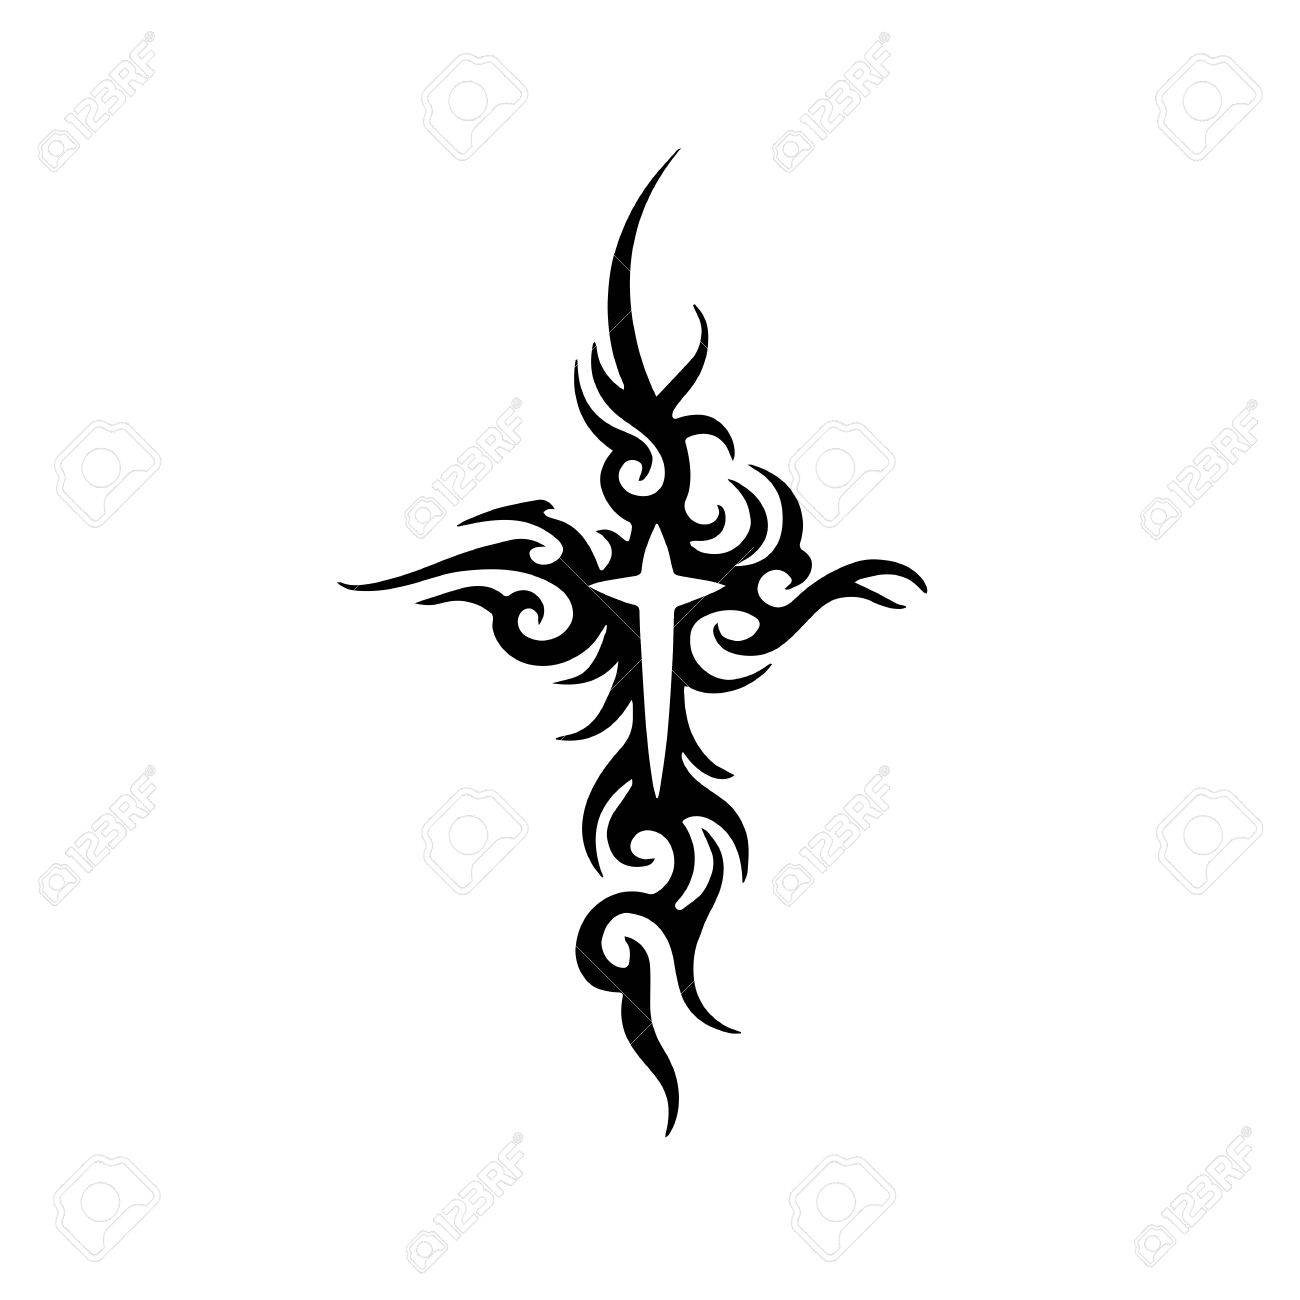 Tribal Cross Tattoo Design Royalty Free Cliparts Vectors And Stock intended for dimensions 1300 X 1300